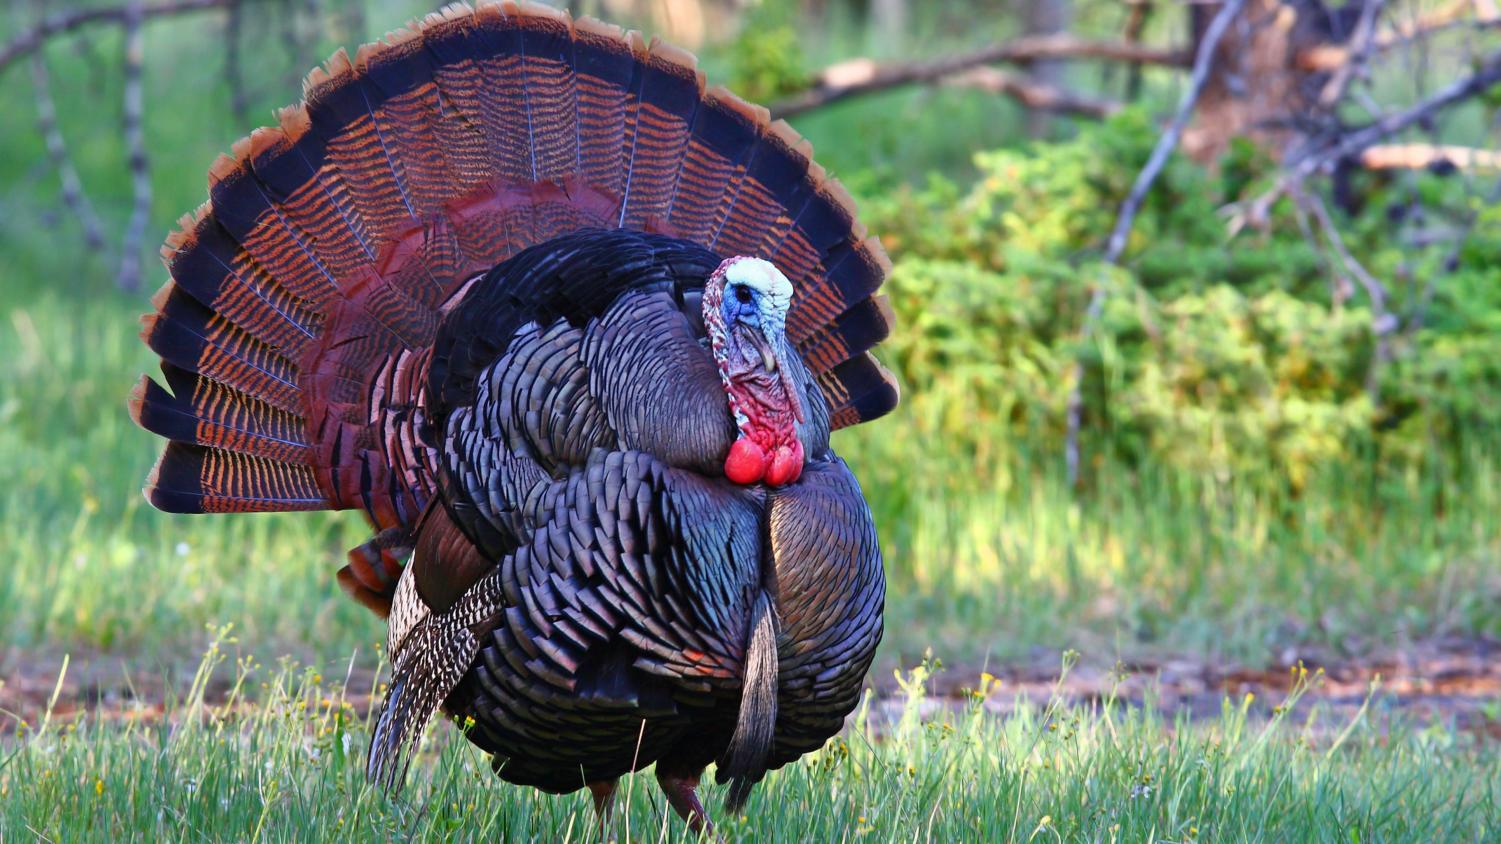 Turkey Hunting: A Favorite Pastime of Many Cavalier Students